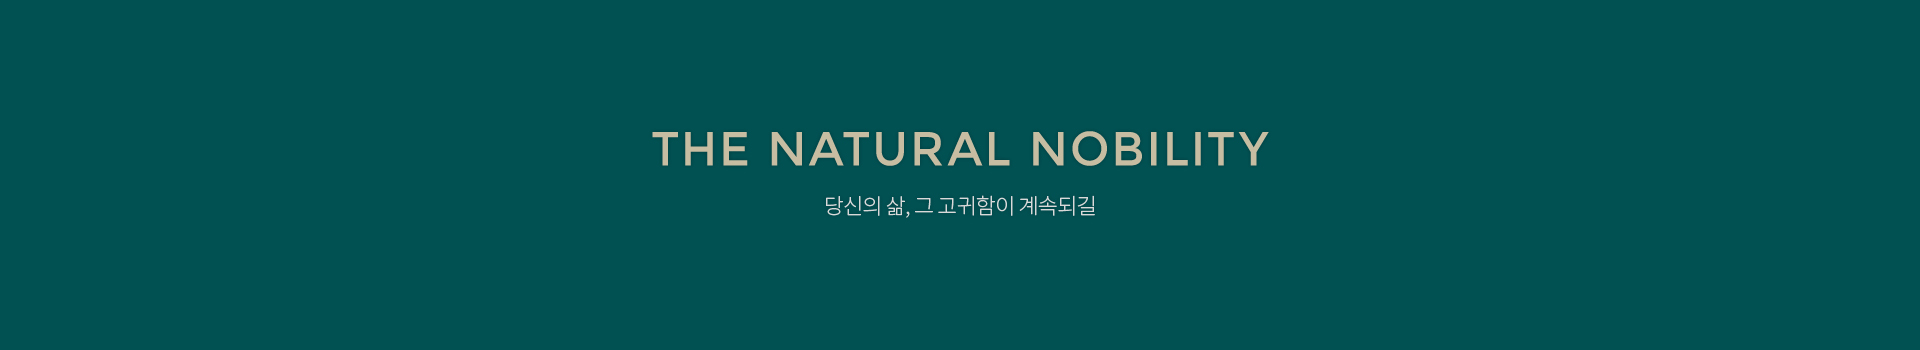 THE NATURAL NOBILITY 본연이 지니는 고귀함